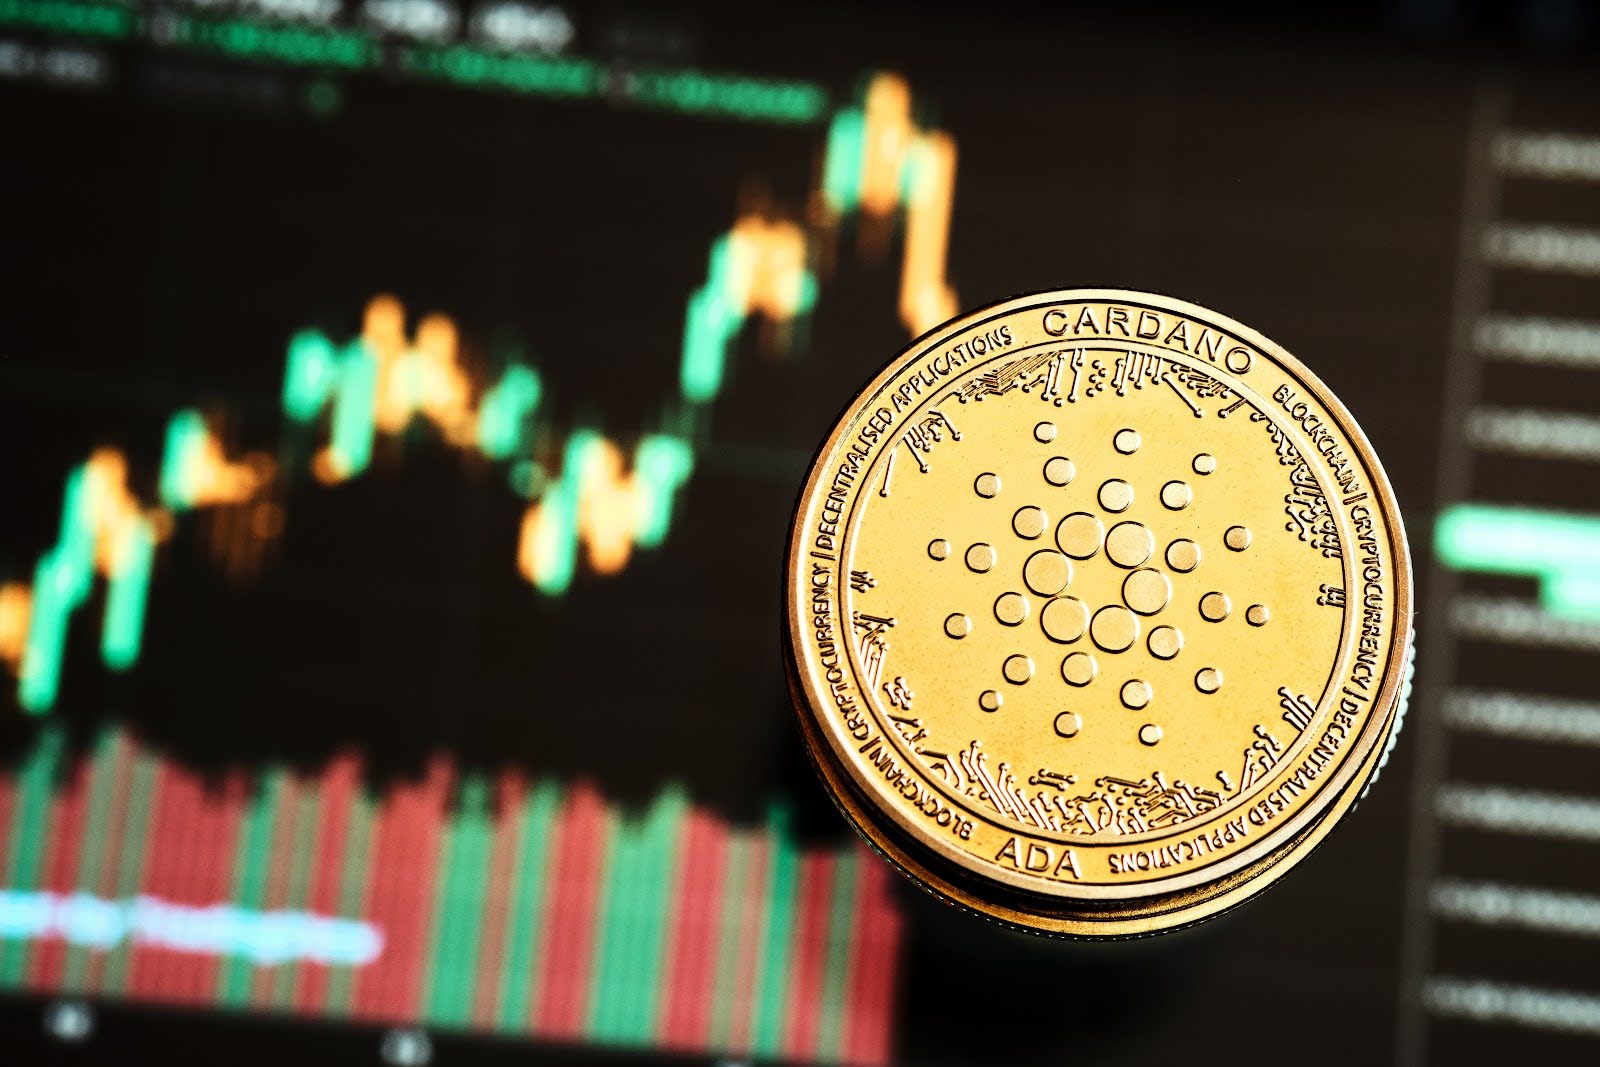 Cardano (ADA) Is Up 72% YTD, Mantle (MNT) Is Up 38% On The Monthly, KangaMoon (KANG) Surges 50% In Days